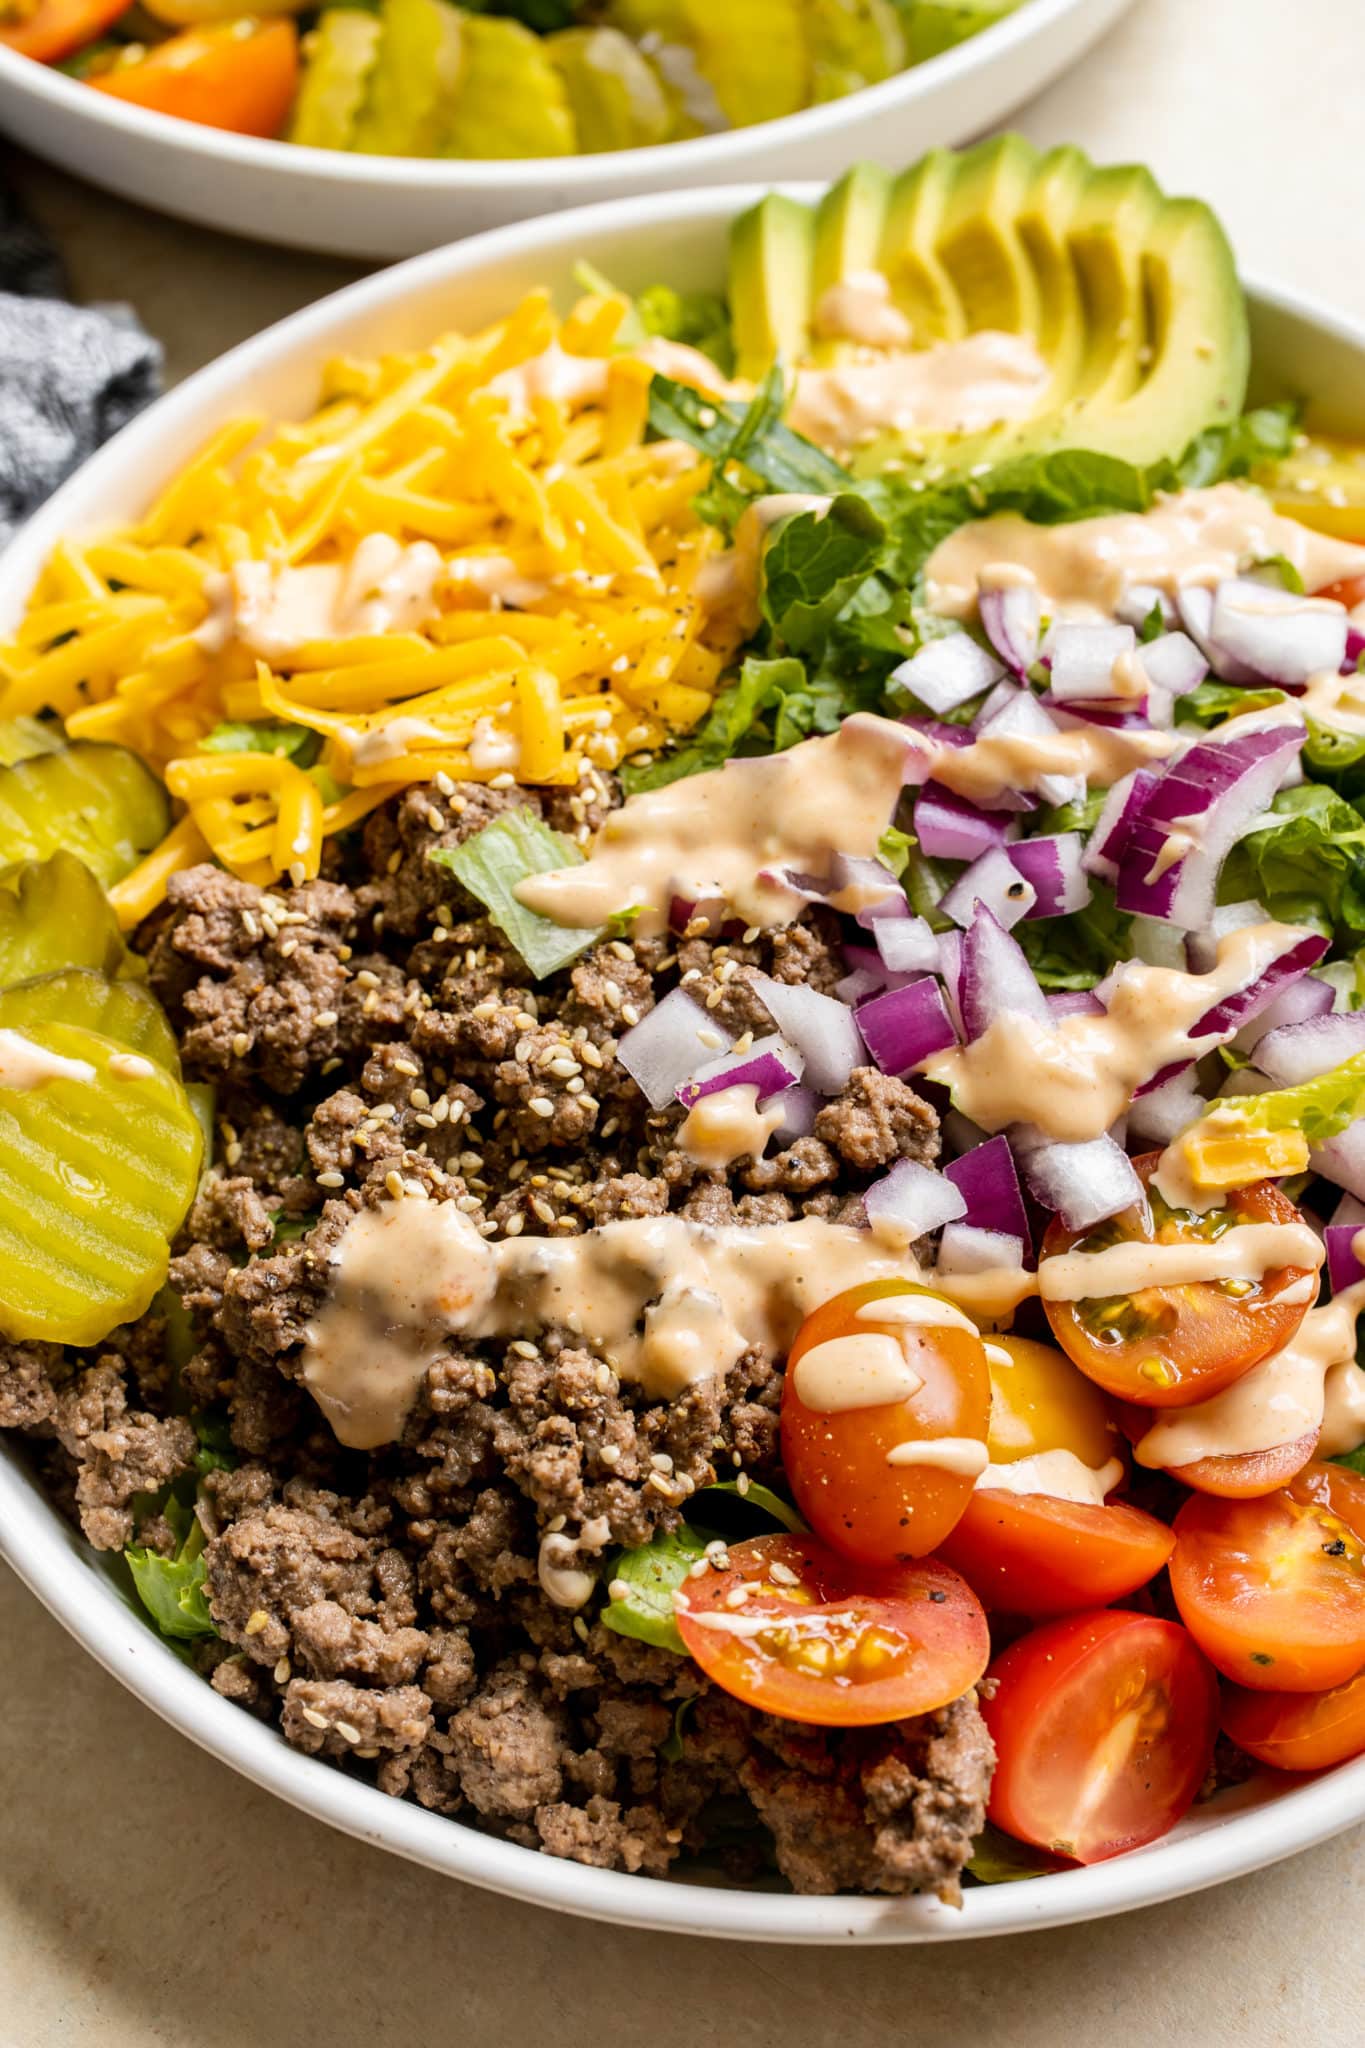 romaine lettuce in a white bowl topped with burger toppings like ground beef, cheese, avocado, red onion, pickles, tomatoes and a special burger sauce. 